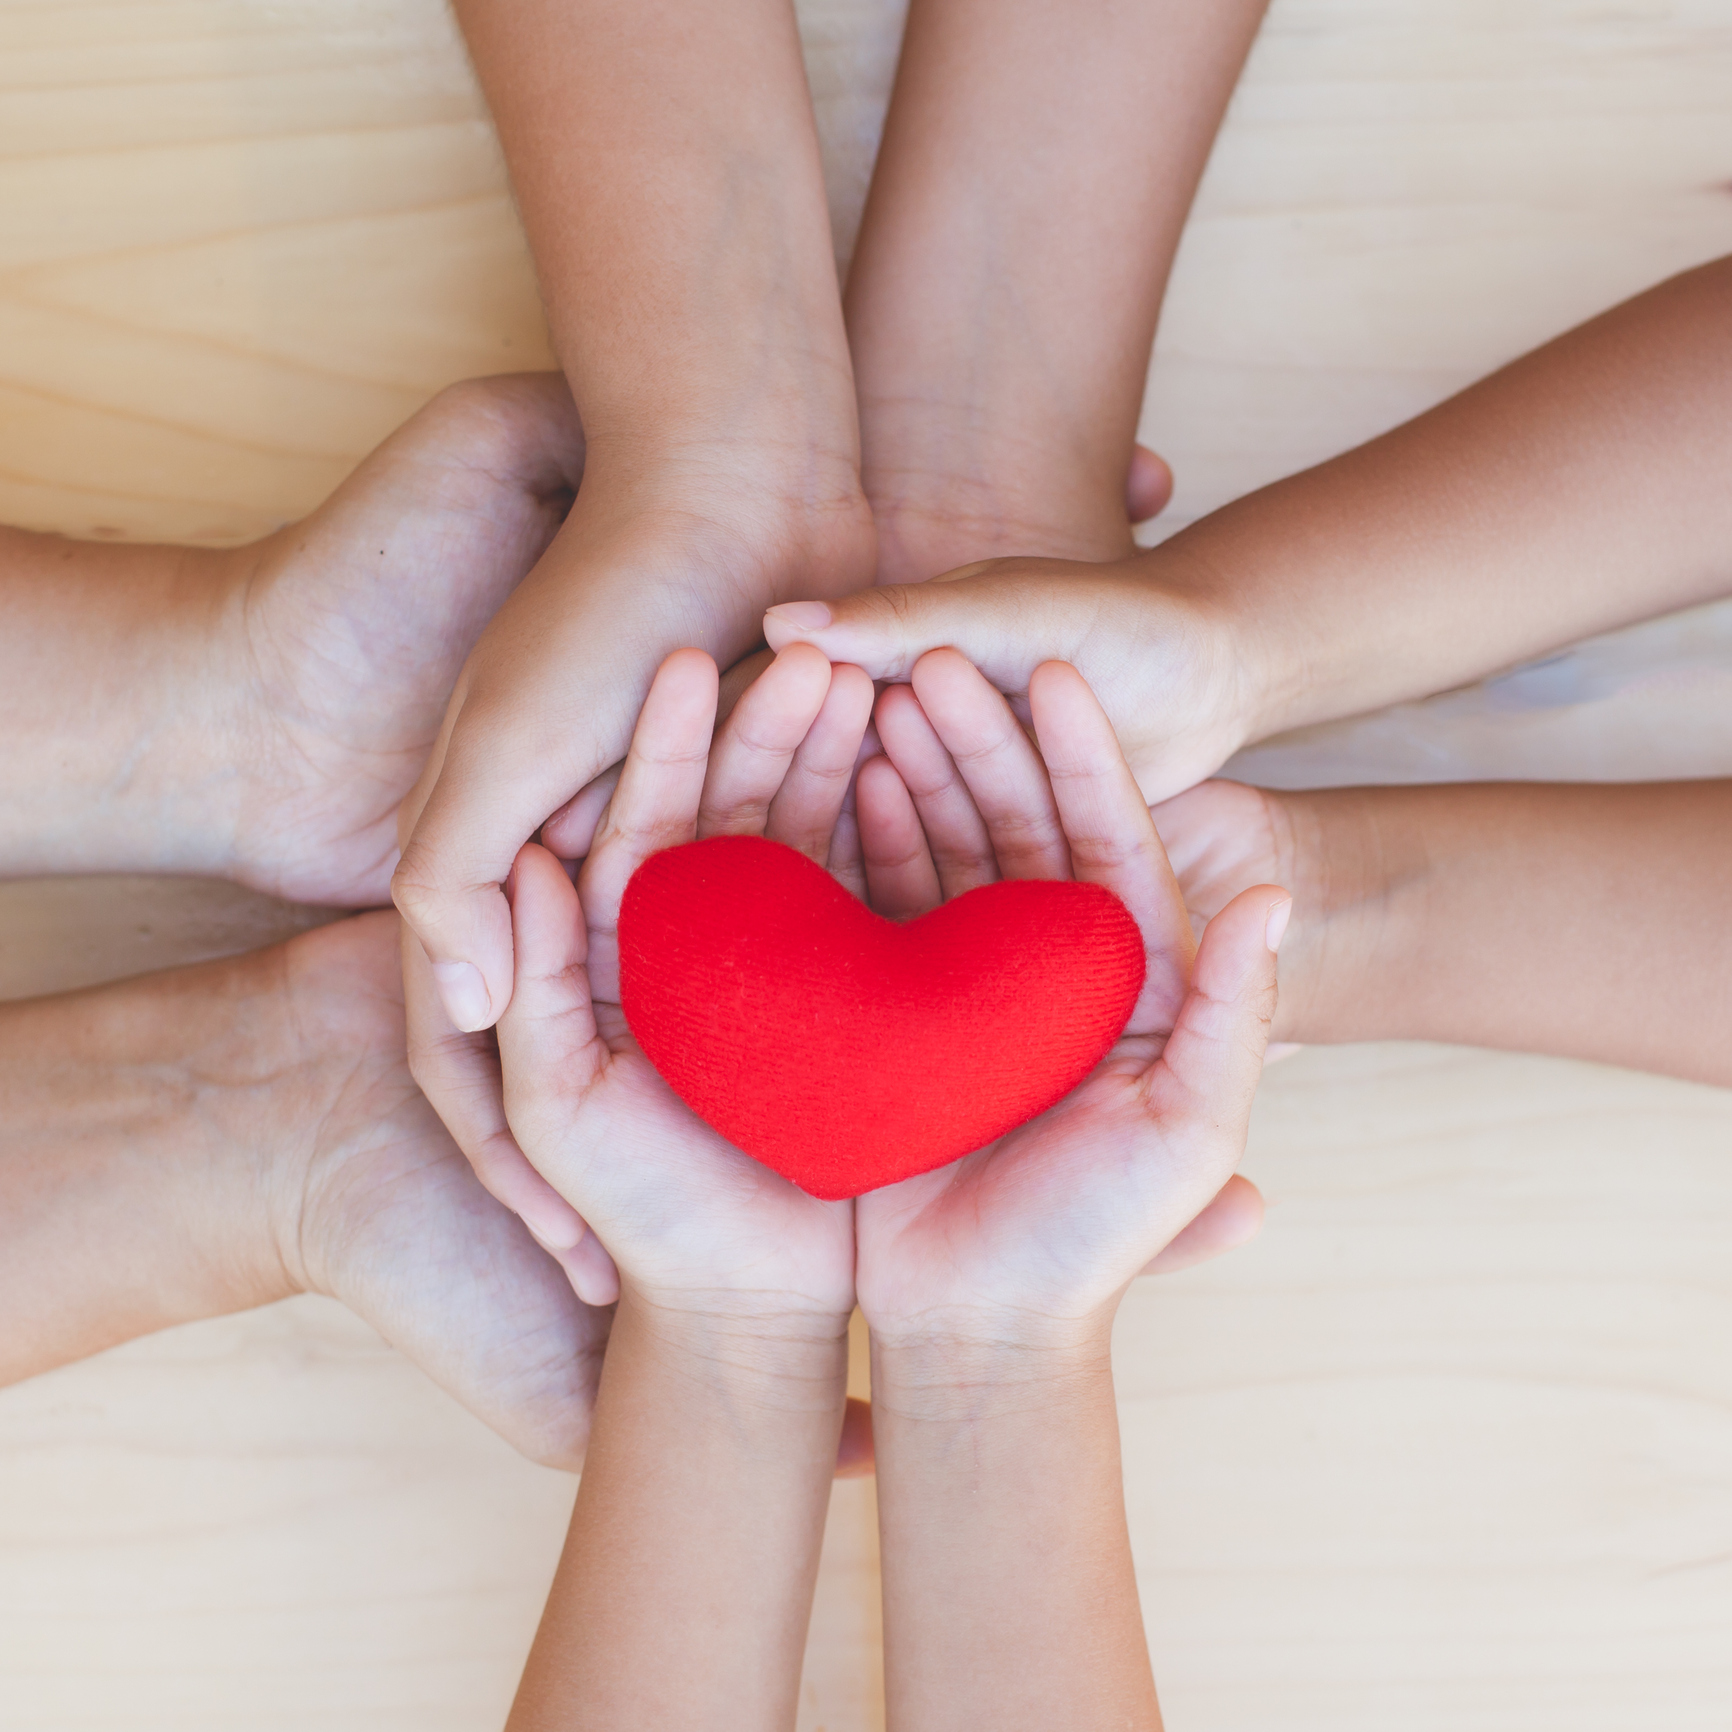 Family and friends stack hands with red heart showing unity, generosity, teamwork and love.